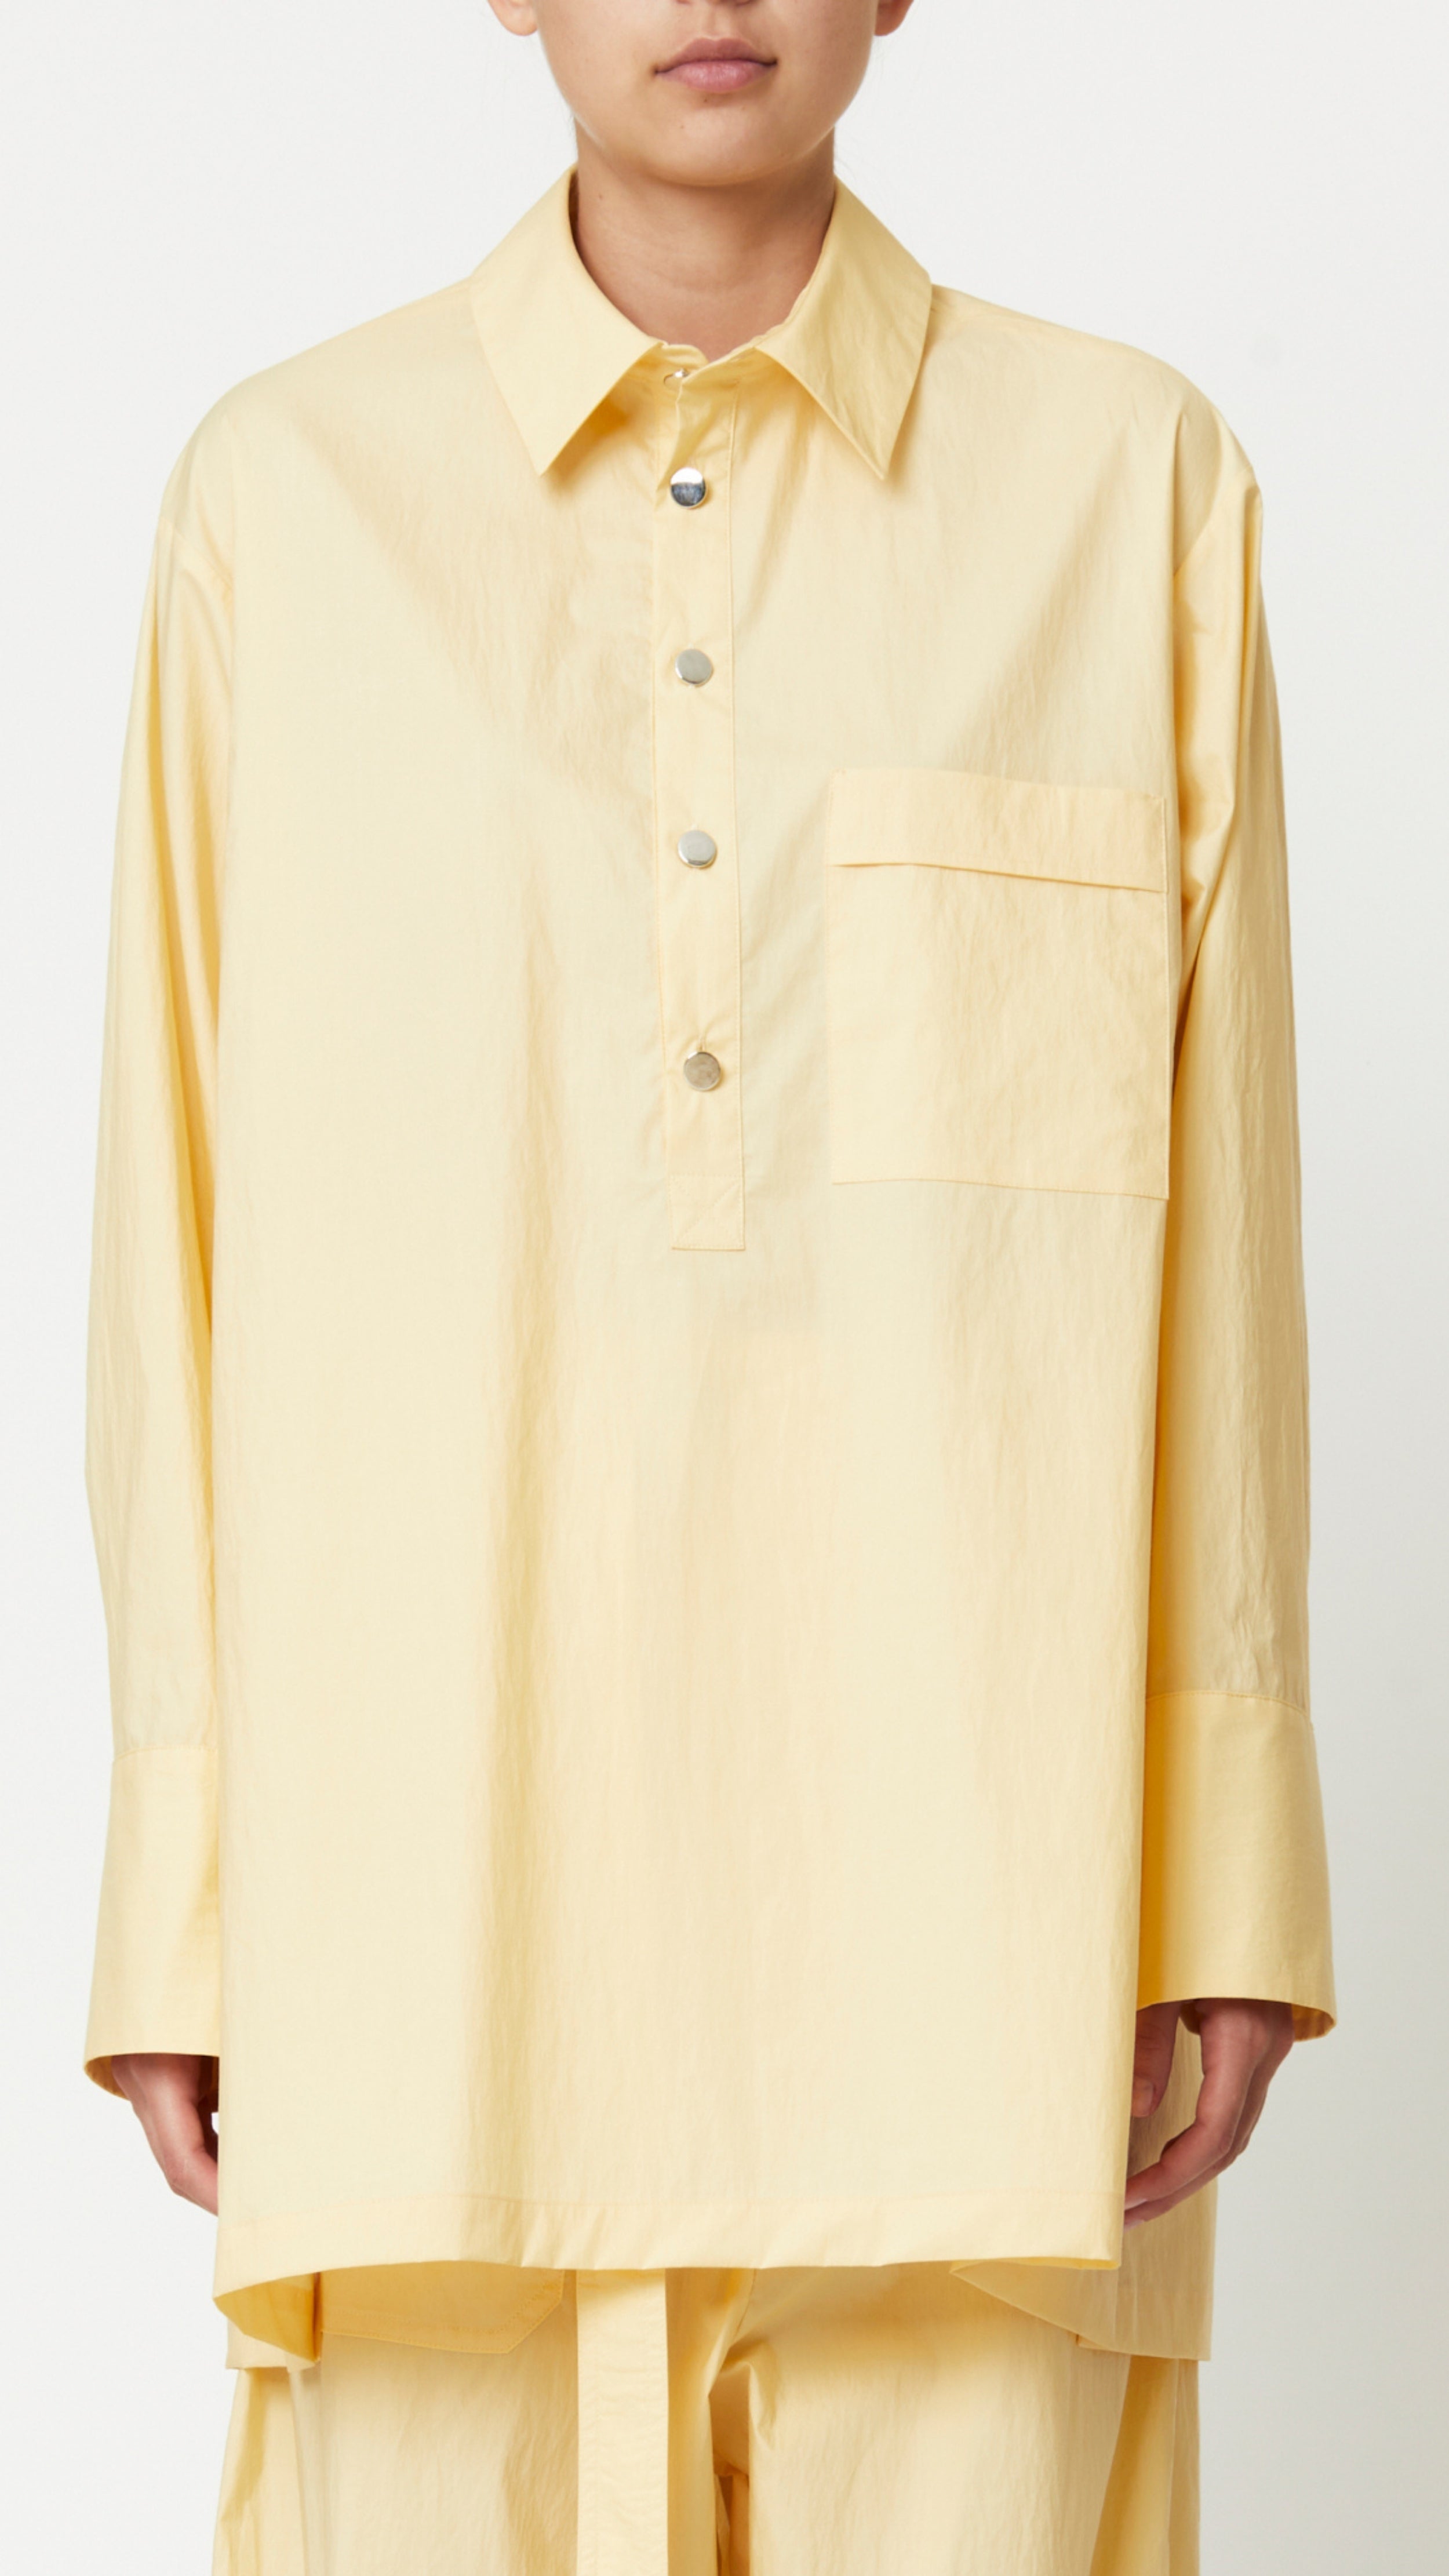 Plan C Eggnog Cotton Shirt A relaxed fit blouse made from light weight cotton in pale yellow and white. With Silver buttons up the front, a chest welt pocket, and a split elongated hem.  Shown on model facing front.